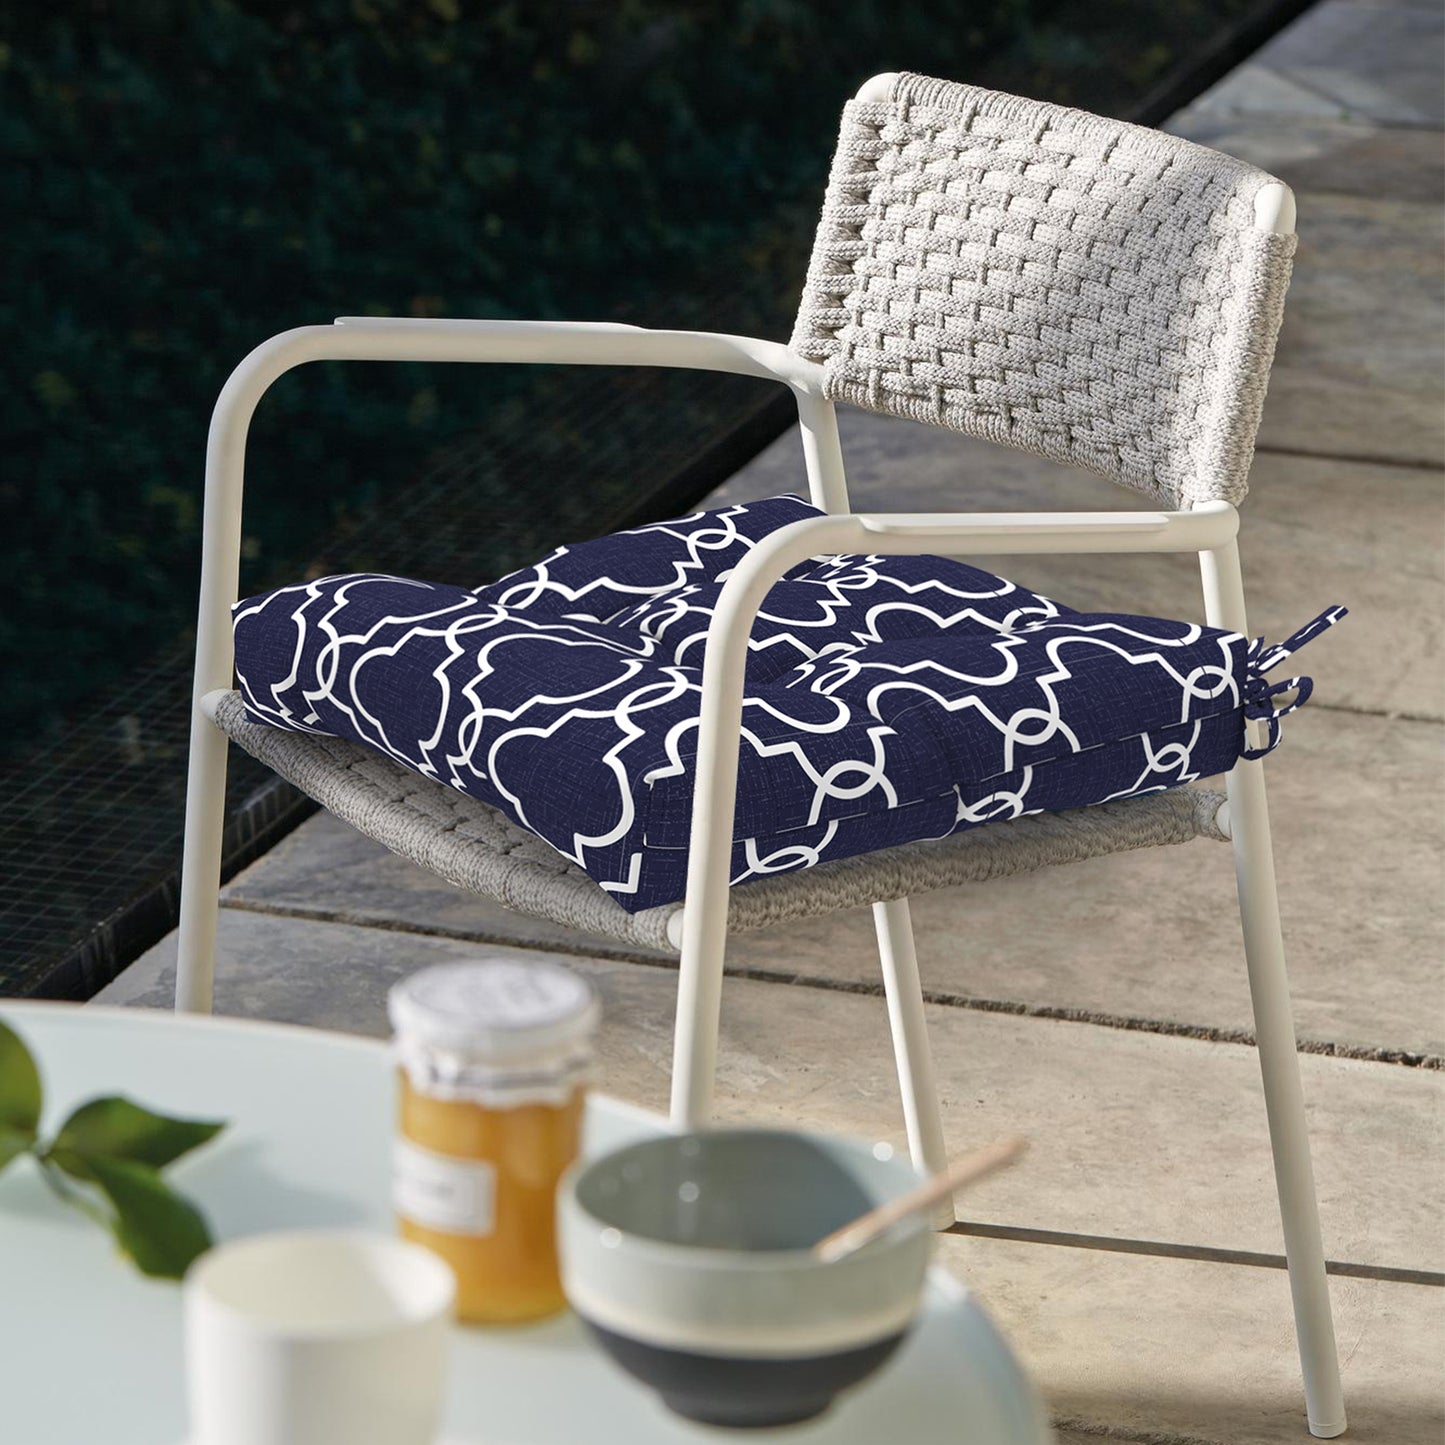 Melody Elephant Indoor/Outdoor Square Tufted Seat Cushions with Ties, Fade Resistant Patio Wicker Thick Chair Pads Pack of 2, 19 x 19 x 5 Inch, Carmody Navy